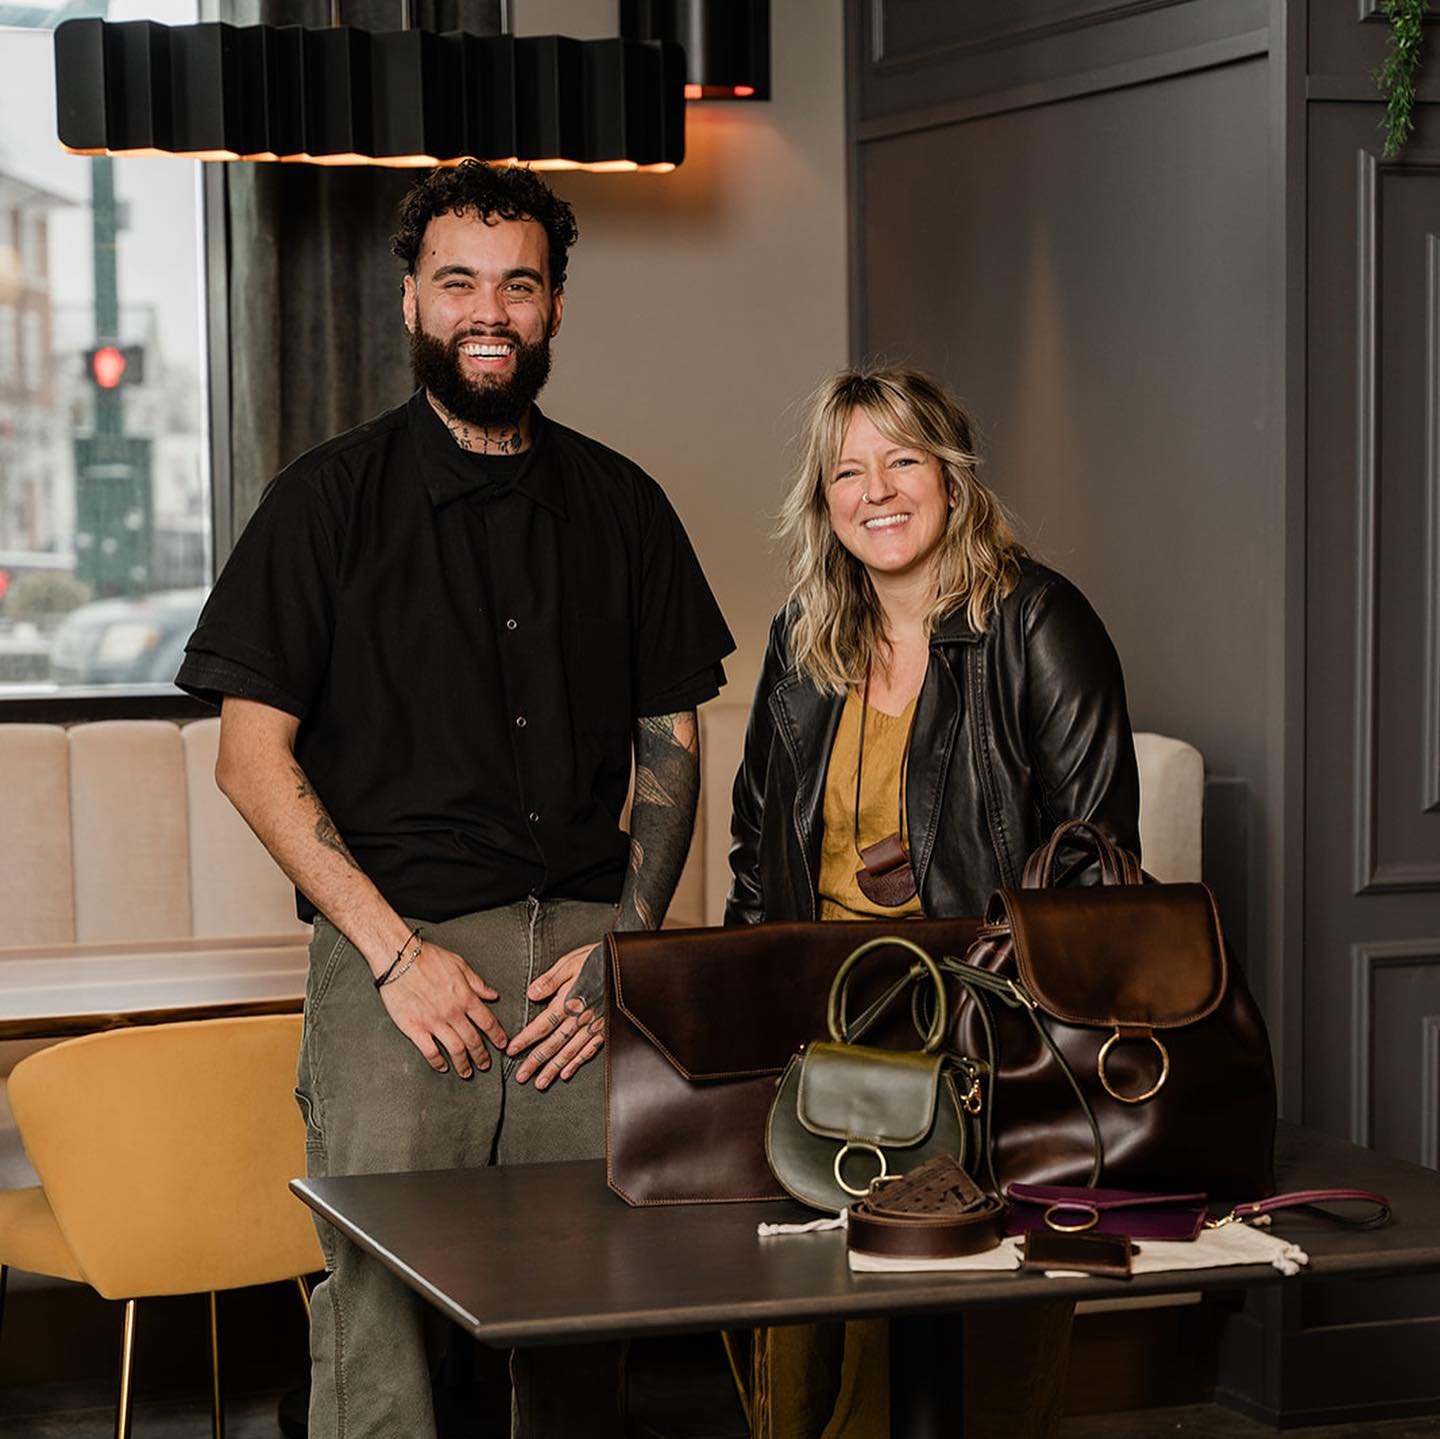 LEDGER GOODS / Dante Keaton, a sous chef with us, and Sarah Daley, the local owner of The Little Design Co, linked up to collaborate on this project with us.

Introducing - the curated + exclusive leather goods collection custom for The Ledger 👏🏼

